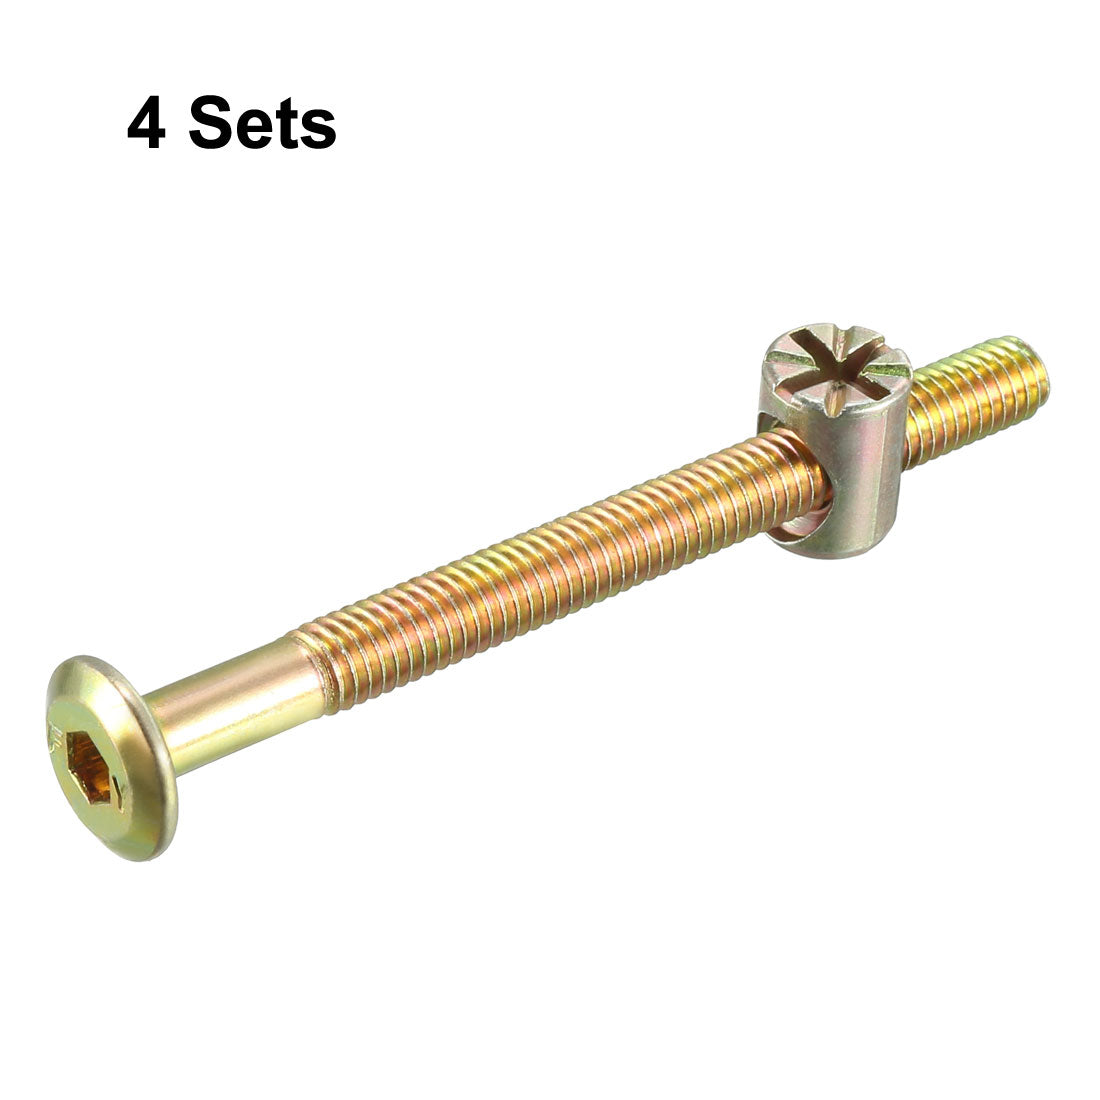 uxcell Uxcell Furniture Bolt Nut Set Hex Socket Screw with Barrel Nuts